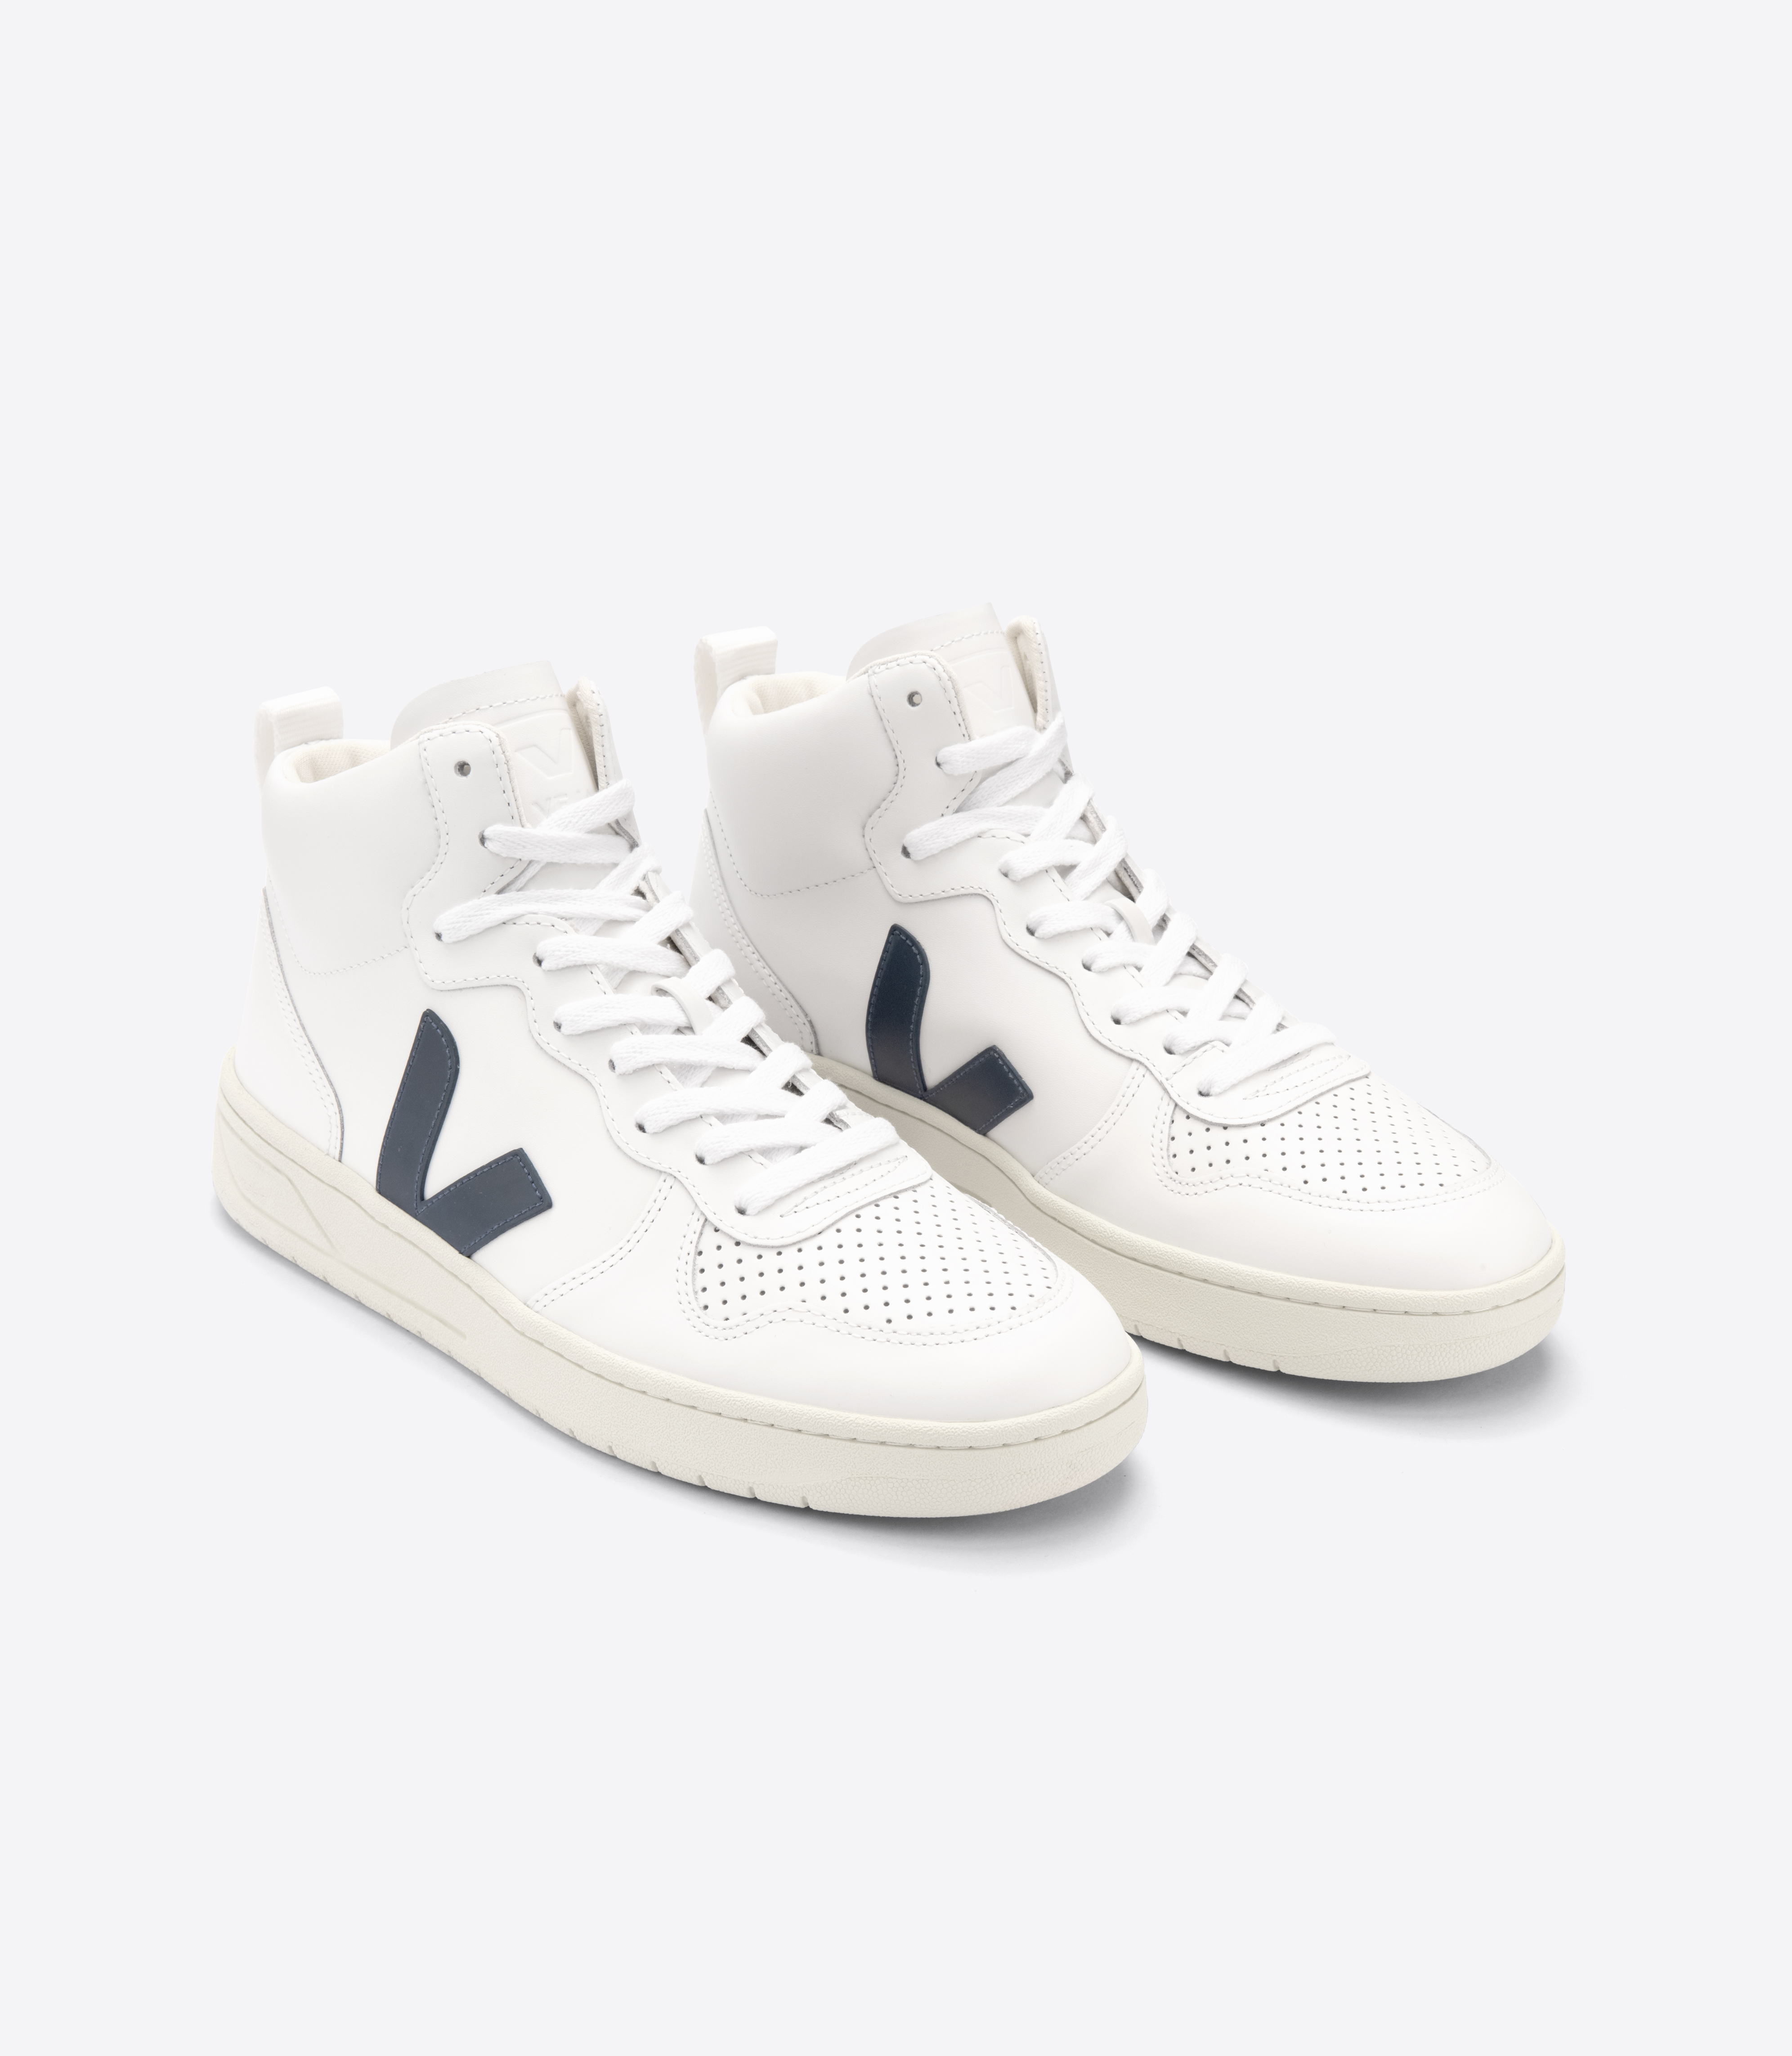 HIGH TOP SNEAKER V-15 LEATHER EXTRA WHITE NAUTICO M